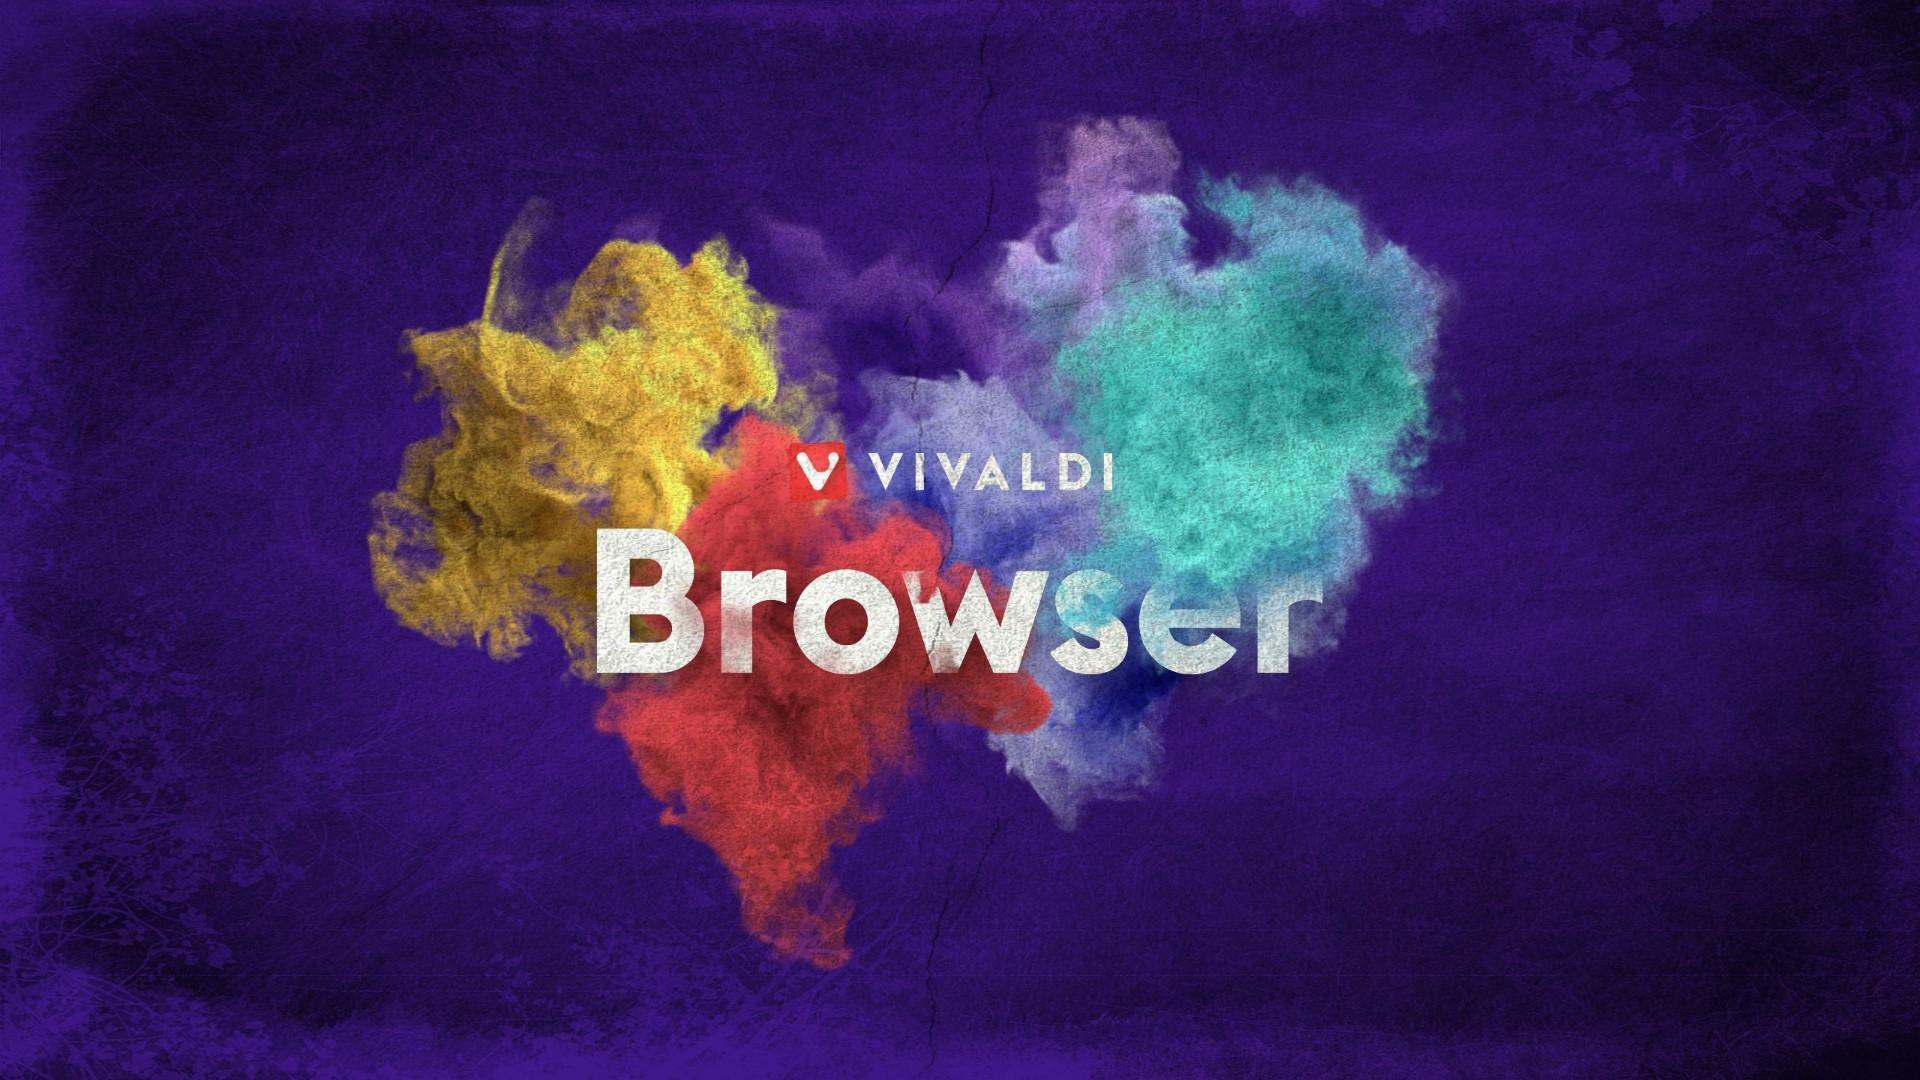 Download 1920x1080 Vivaldi, Browser, Texture Wallpapers for